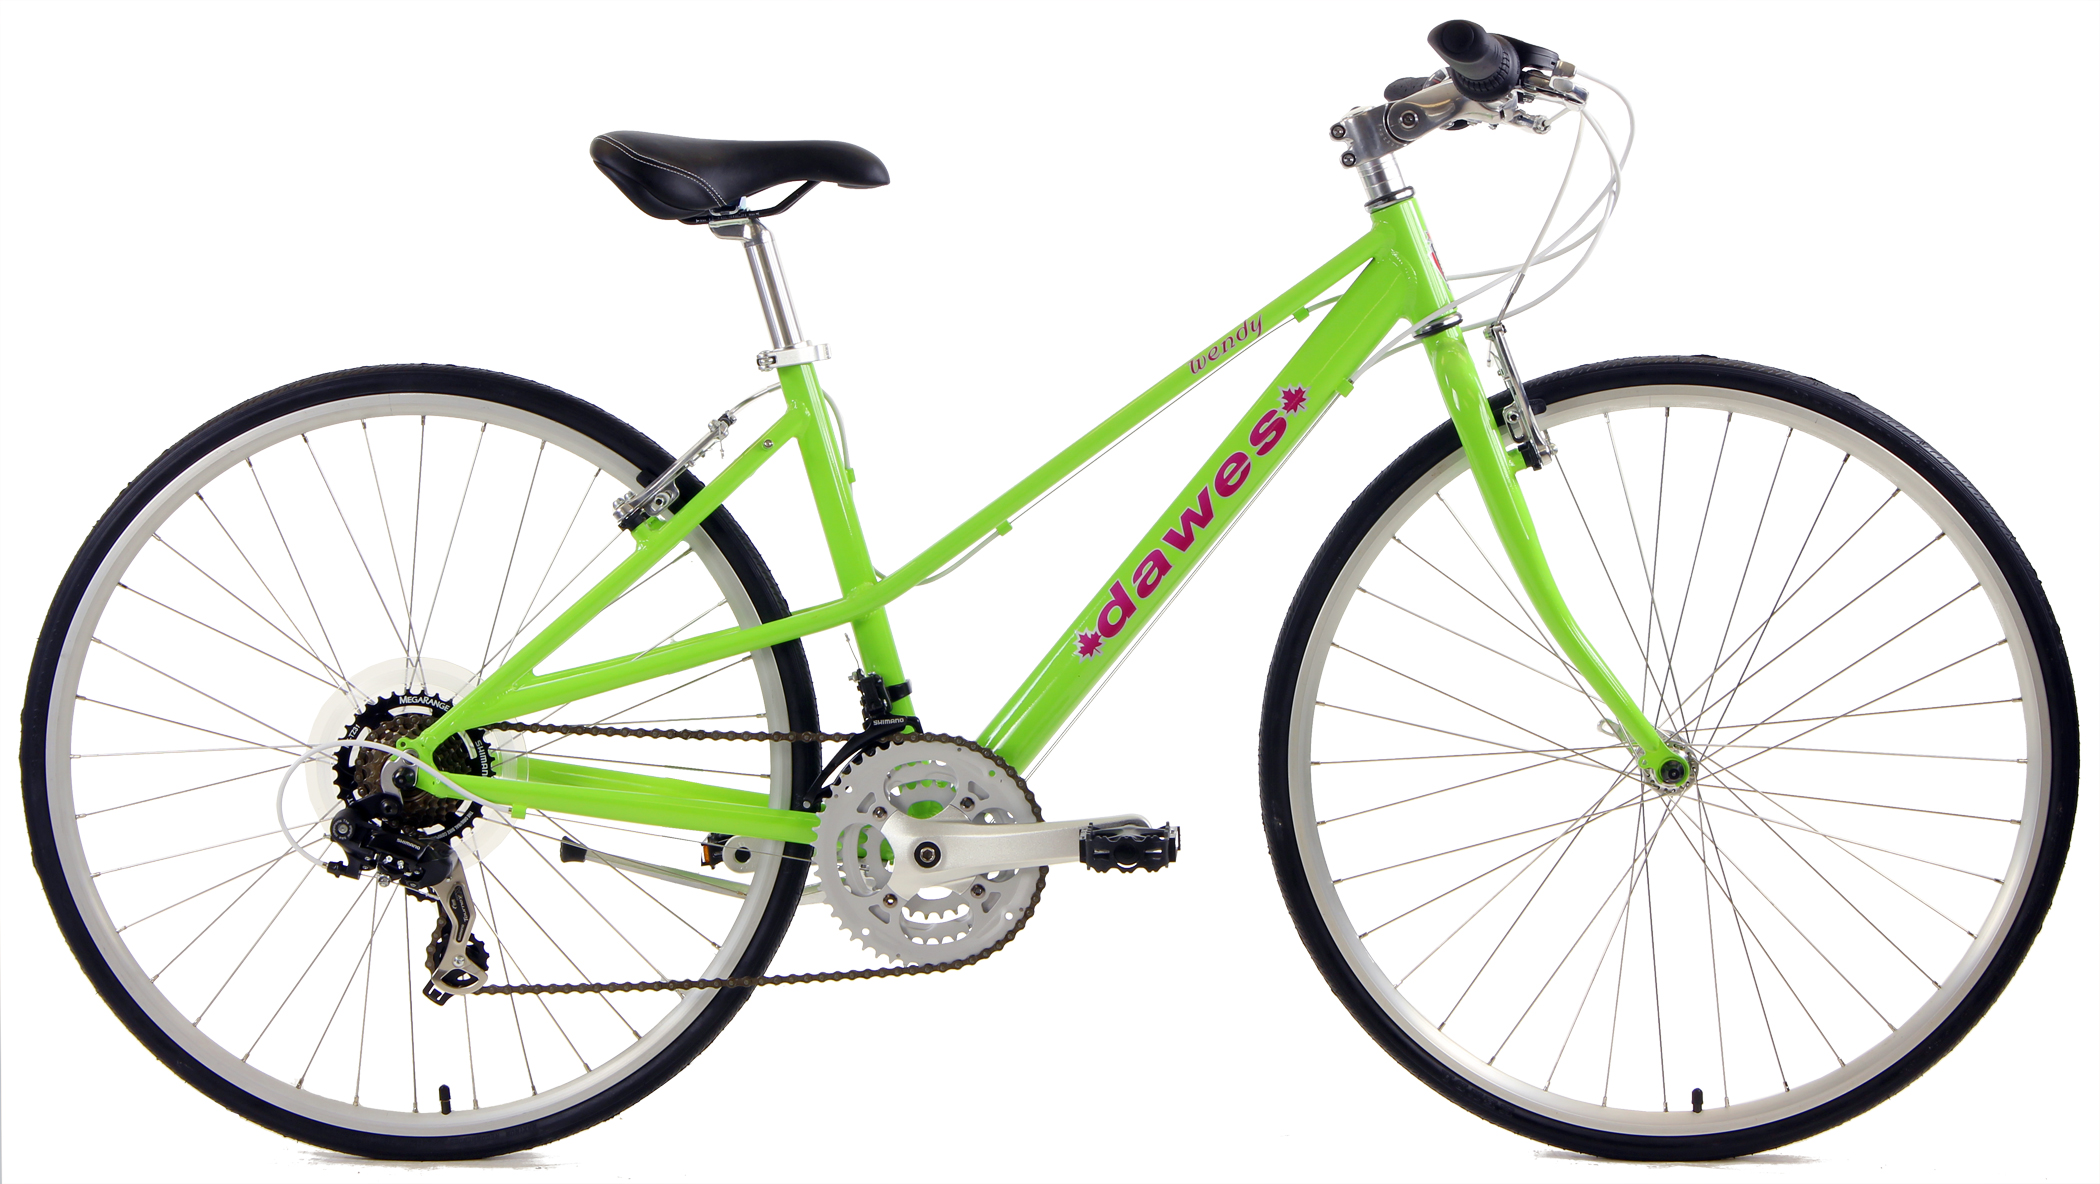 Save Up to 60% Off Womens Hybrid City Bikes - Dawes Wendy Women Specific Flat Bar, Hybrid Road Bikes